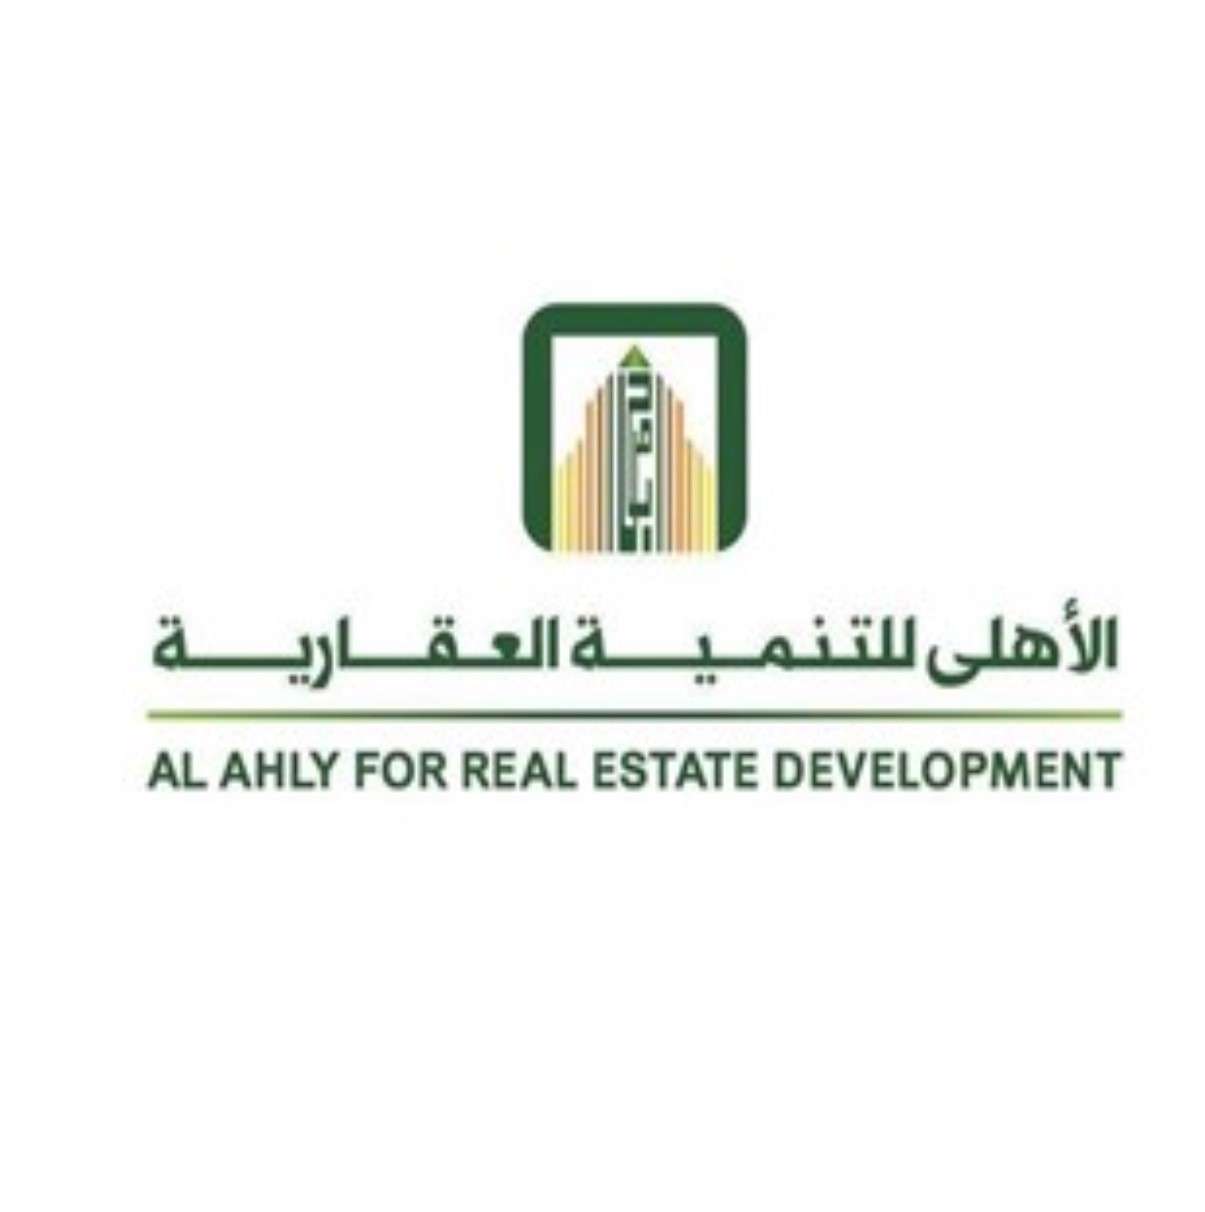 Al Ahly for real estate